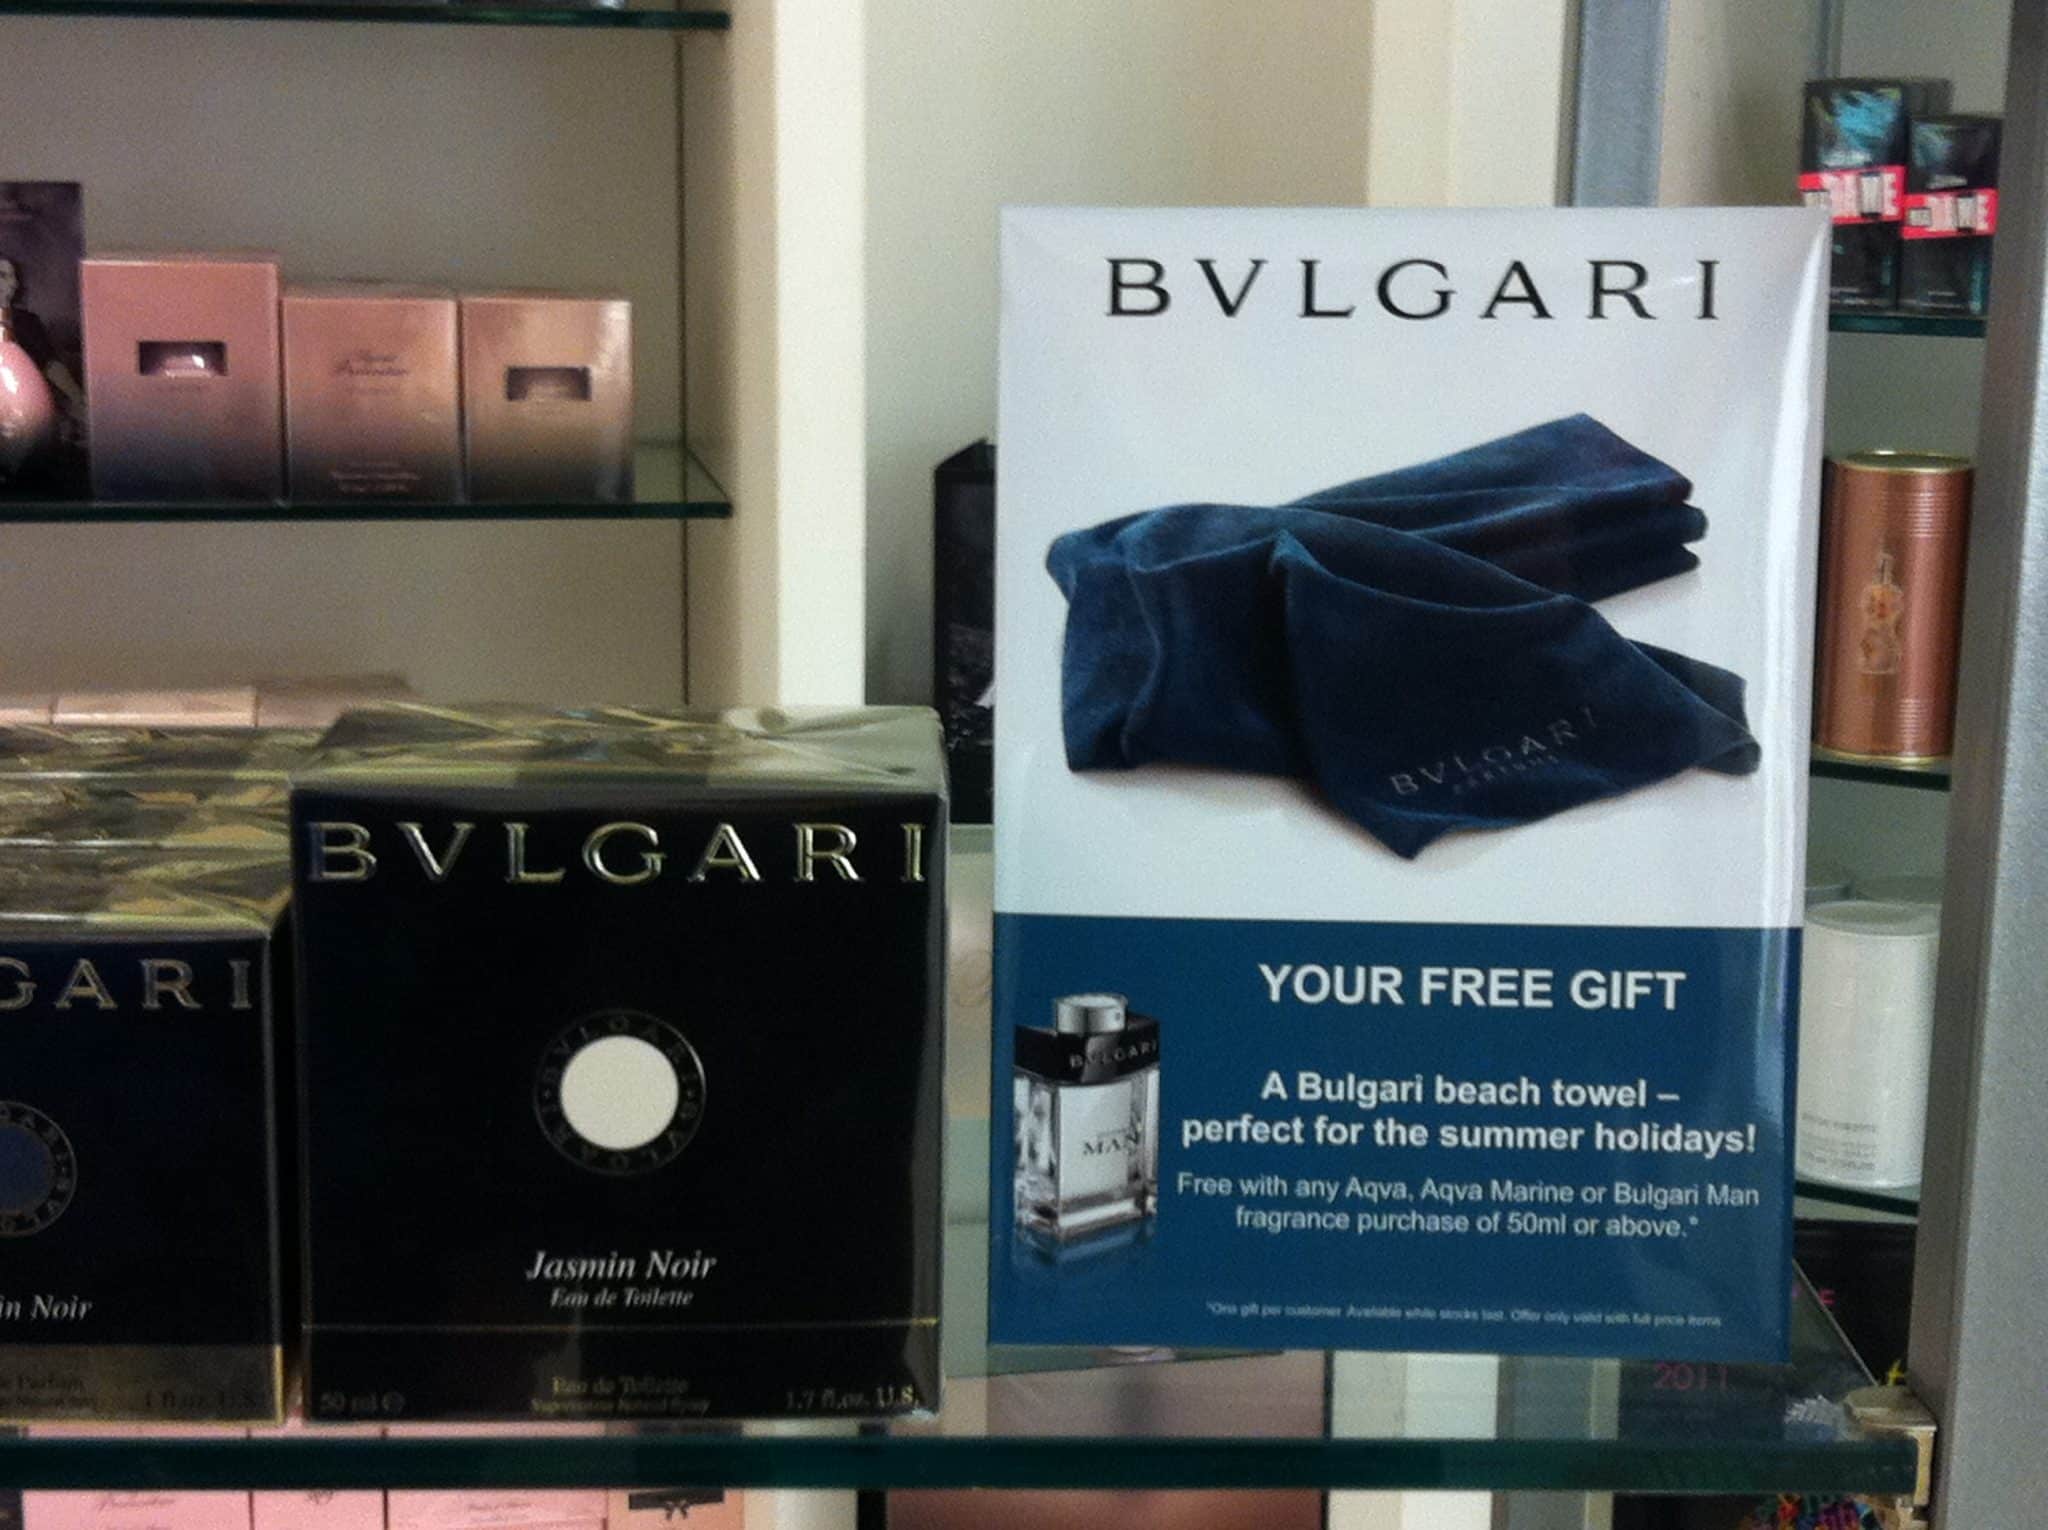 A special sparkle to your summer, Bvlgari